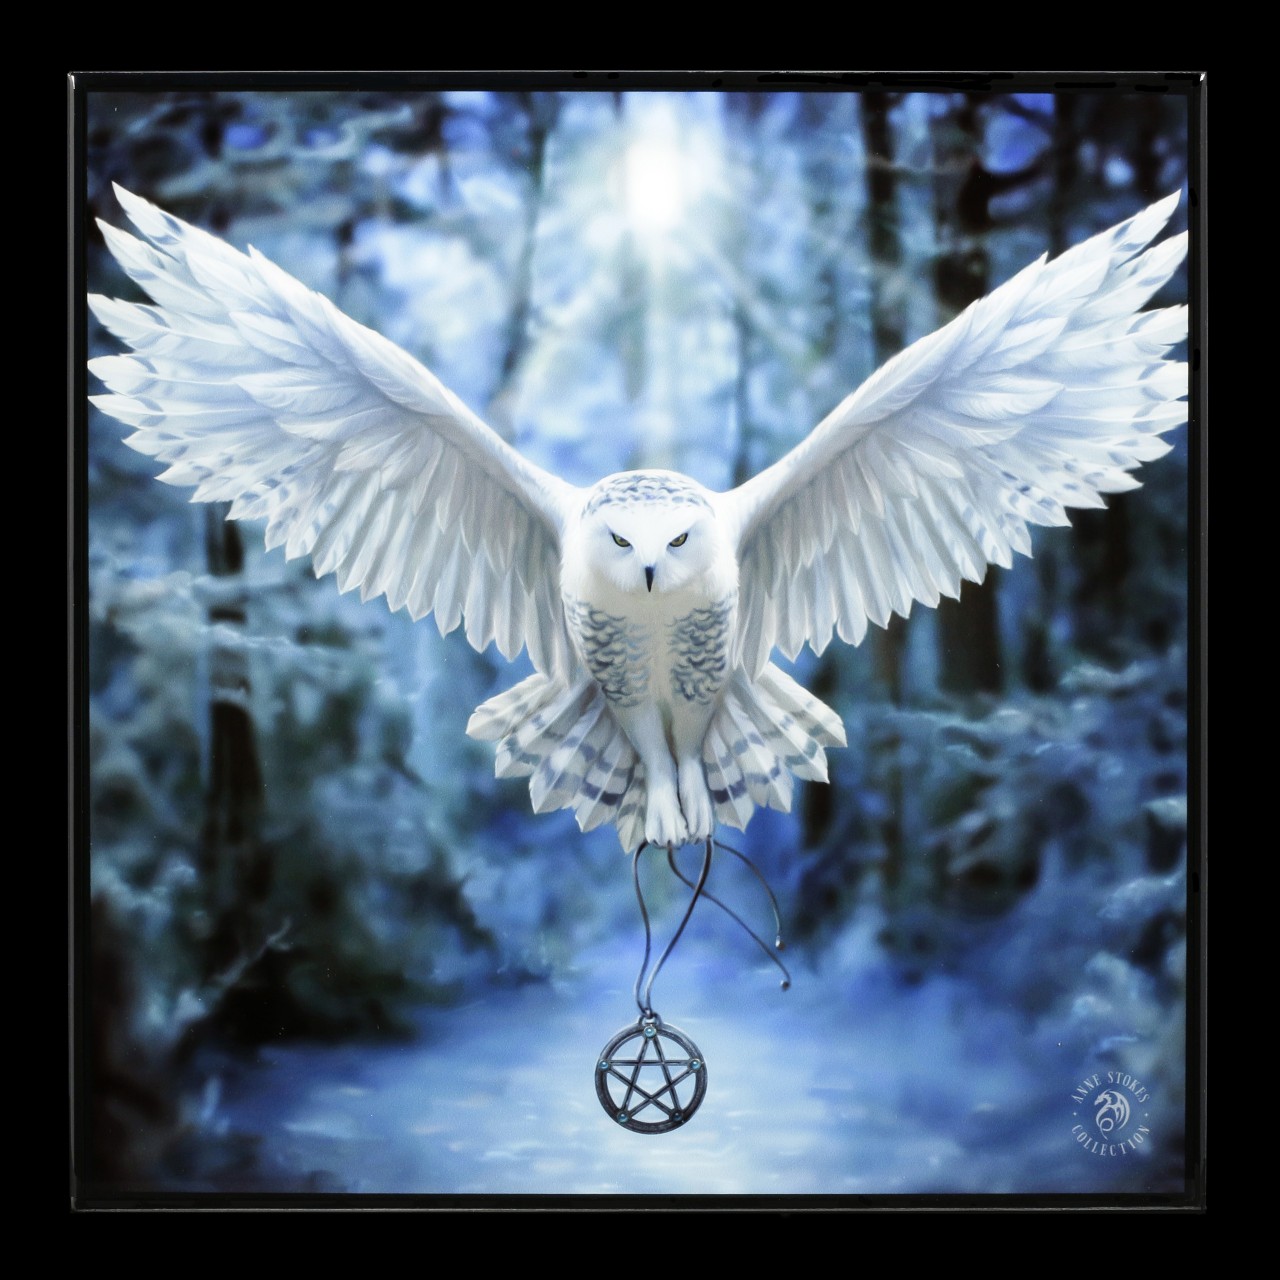 Small Crystal Clear Picture with Owl - Awaken Your Magic